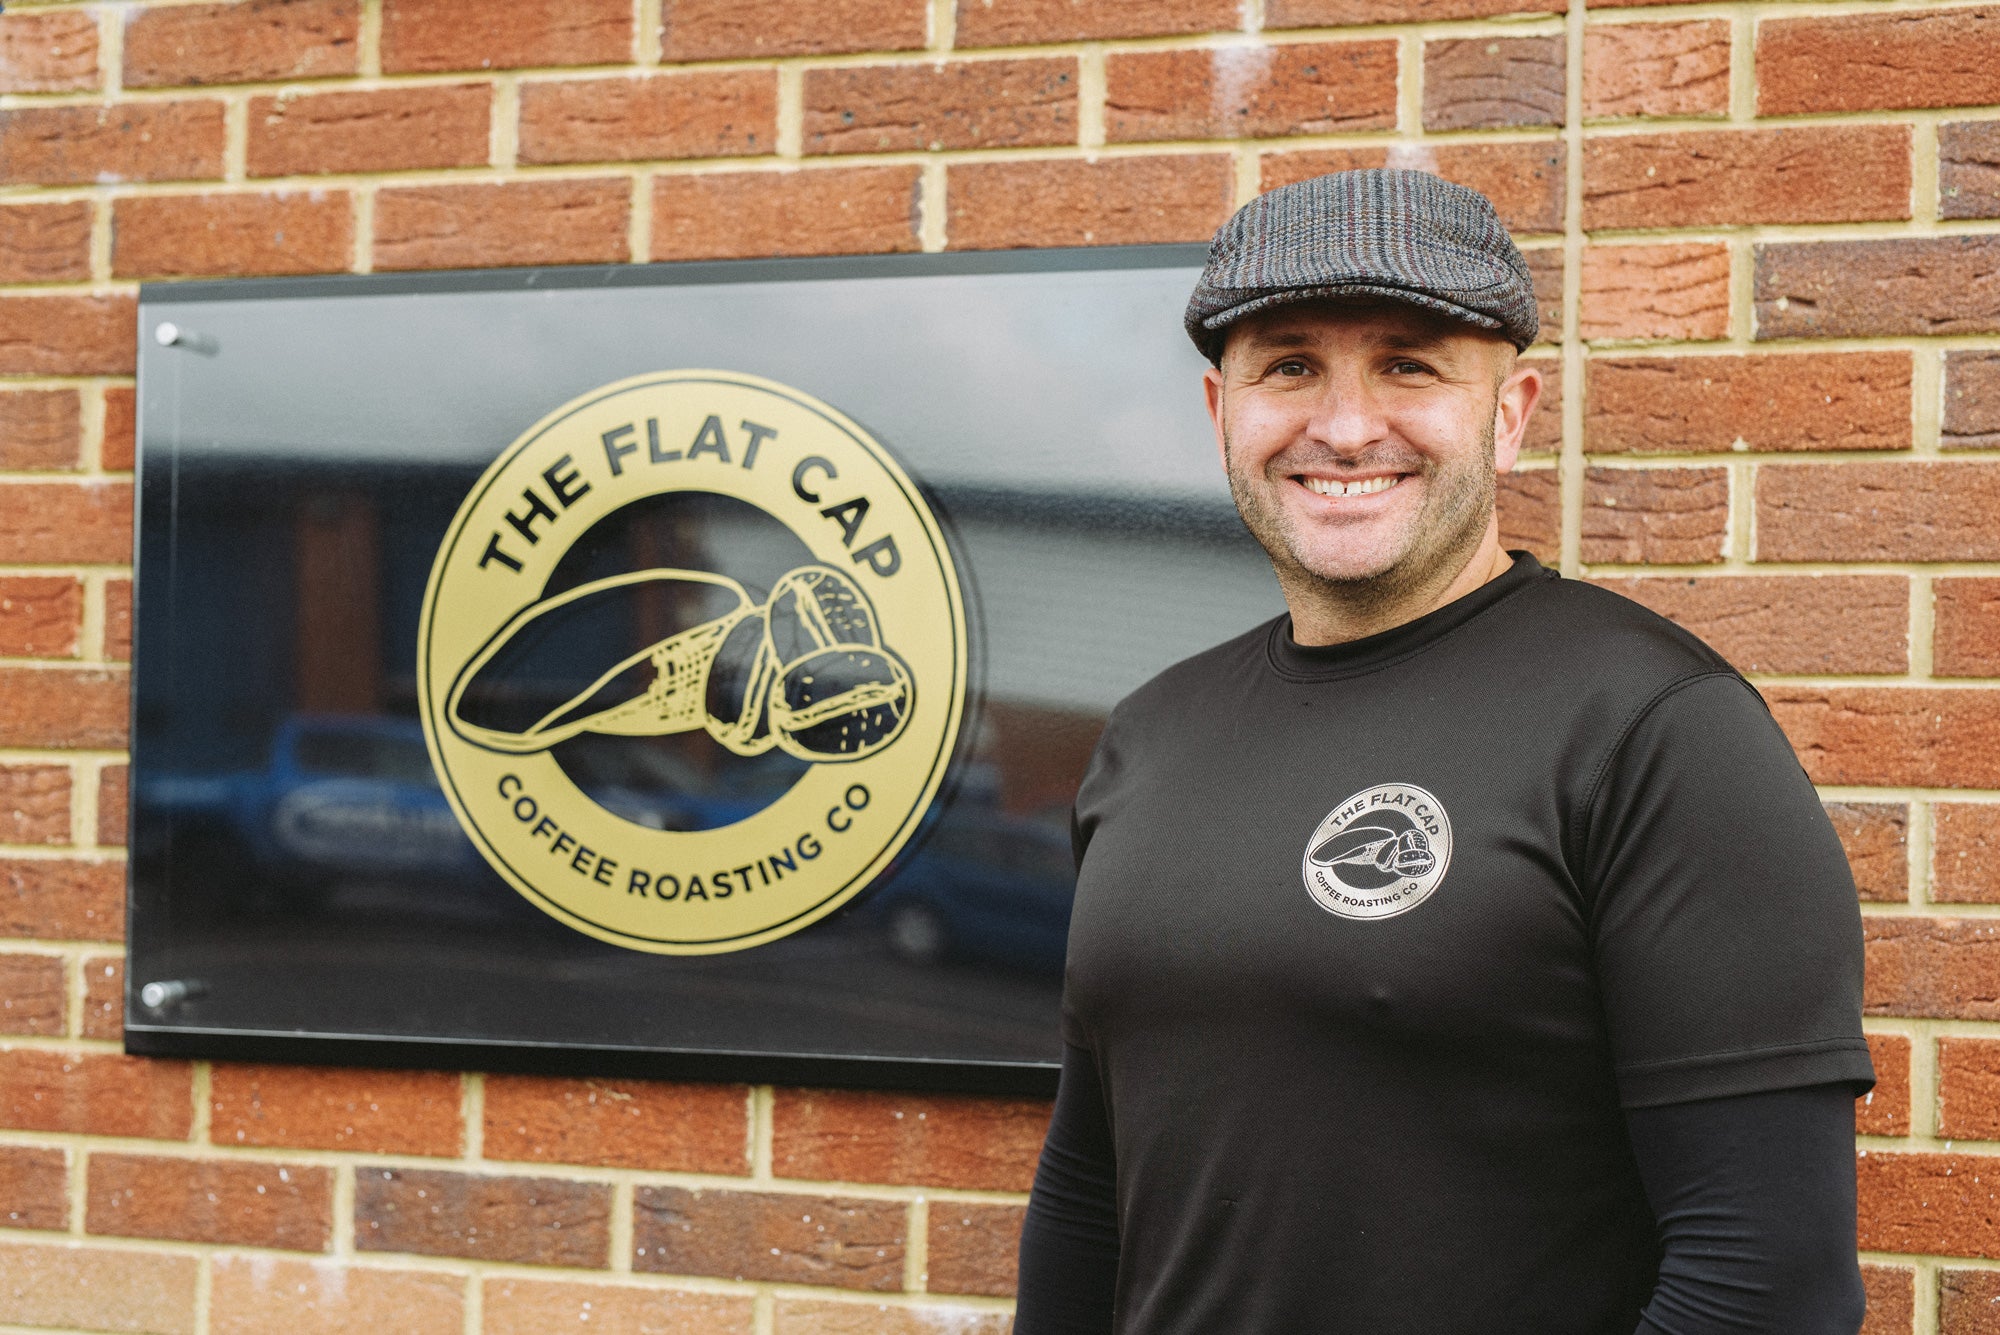 Mark Hepworth standing next to wall displaying Flat Cap Coffee Roasting Co. sign